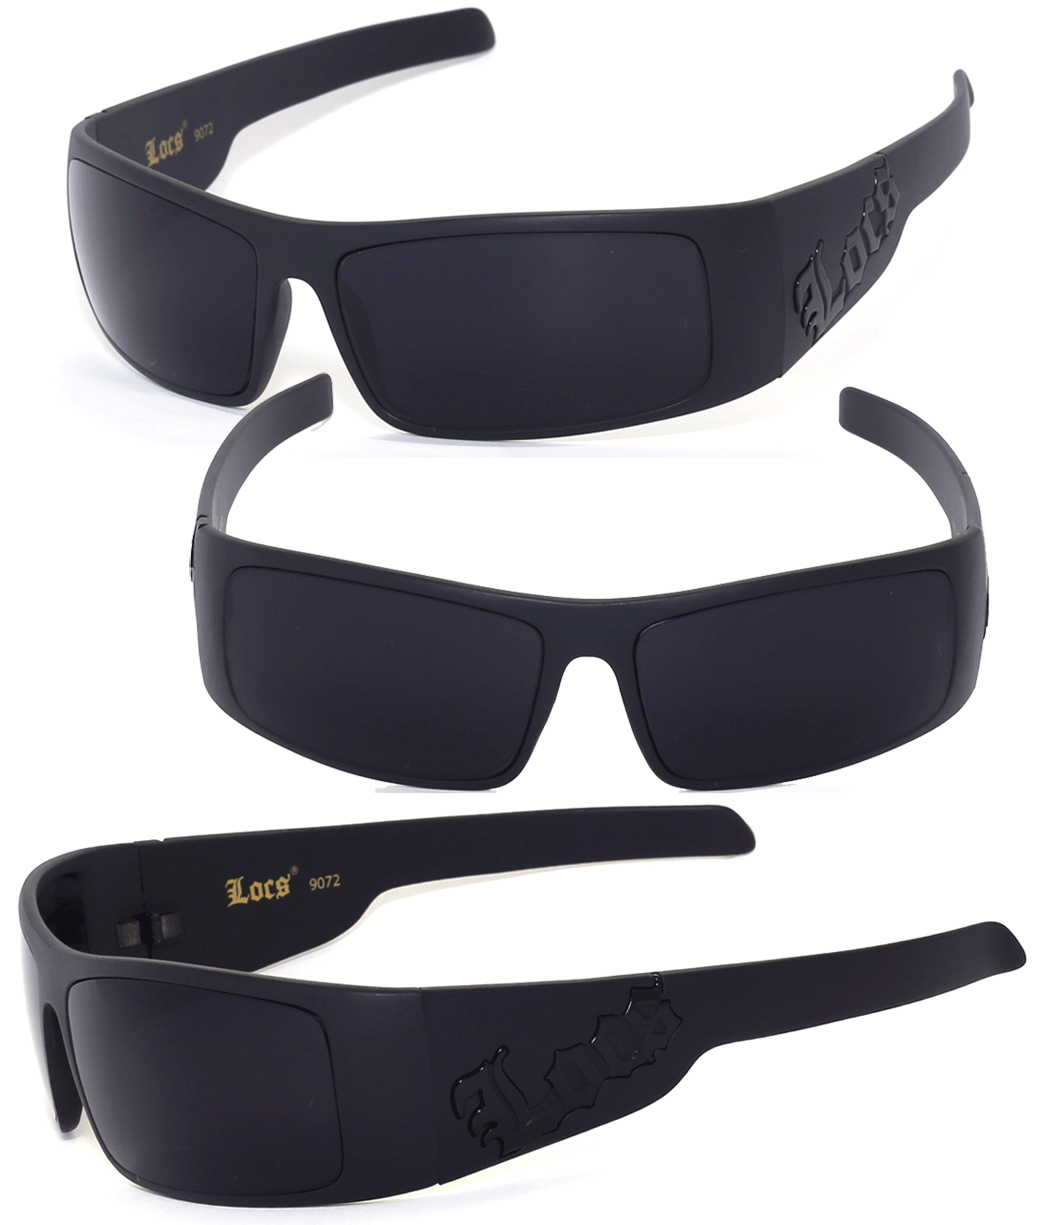 Buy Zesta Thug Life Sunglasses for Men and Women | Funky Glasses/Goggles  for Thuglife | Black Pixelated Glasses at Amazon.in